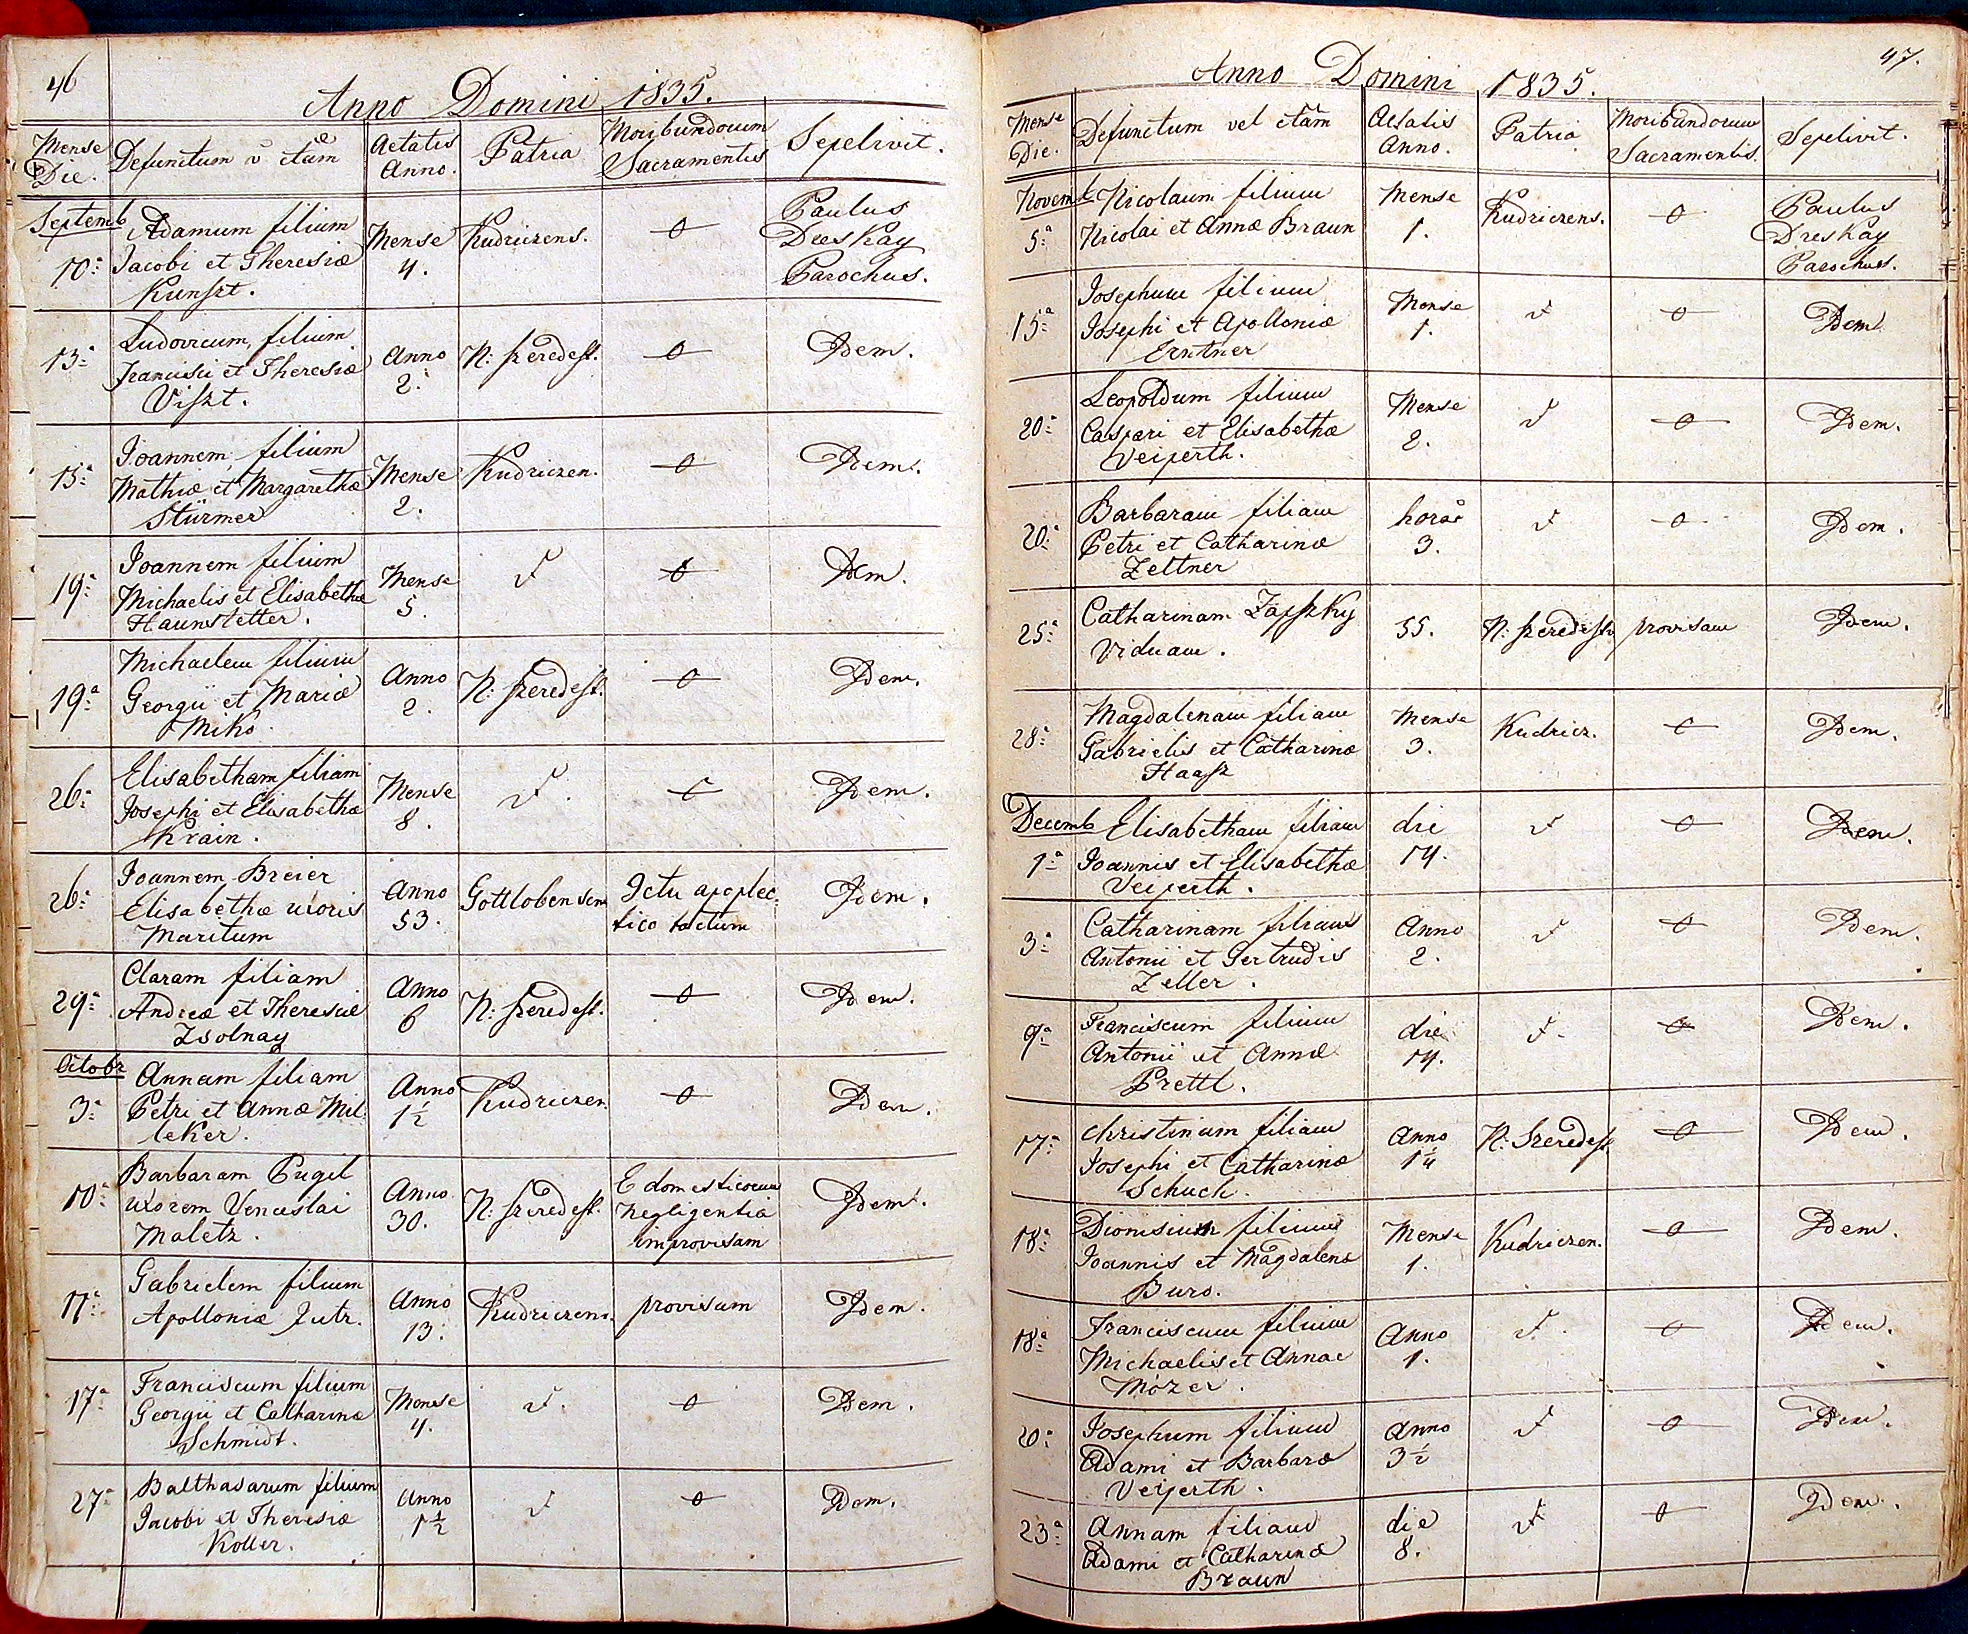 images/church_records/DEATHS/1742-1775D/046 i 047